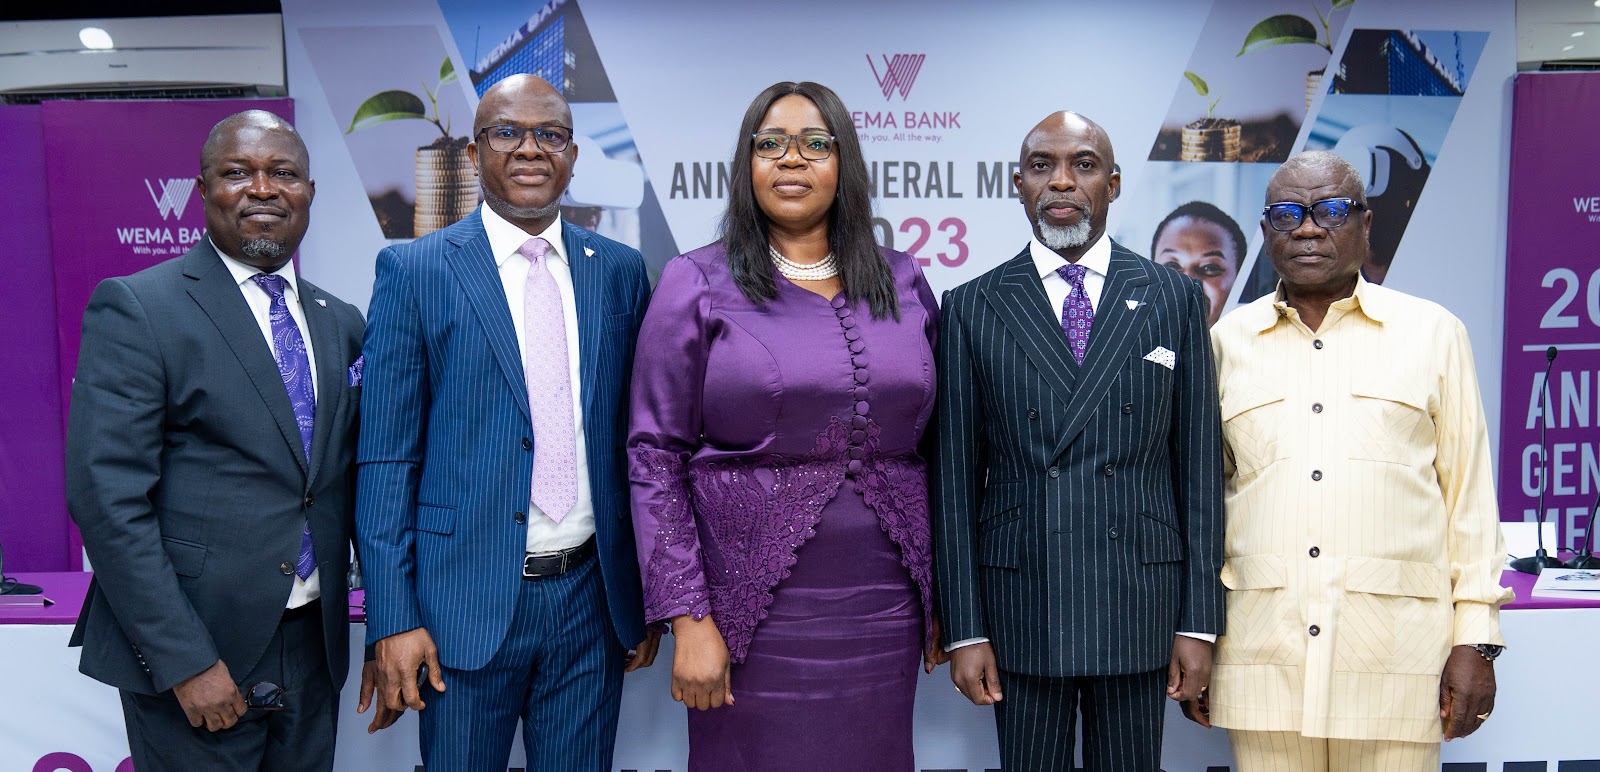 Shareholders commend Wema Bank’s extraordinary performance and profitability at Wema Bank AGM 2023 L-R: Company Secretary, Wema Bank, Johnson Lebile; Deputy Managing Director, Wema Bank, Wole Akinleye; Chairman, Board of Directors, Wema Bank, Dr (Mrs.) Oluwayemisi Olorunshola; MD/CEO, Wema Bank, Moruf Oseni and Chairman of the Statutory Audit Committee, Joe Anosike, at the Wema Bank 2023 Annual General Meeting held in Lagos, today. Wema Bank, Nigeria’s foremost innovative bank and pioneer of Africa’s first fully digital bank, ALAT, has placed its shareholders in celebration mode, receiving commendation for a profitable 2023 financial performance, at its just concluded 2023 Annual General Meeting, which held on Tuesday, May 28, 2024. The Wema Bank AGM is a yearly gathering convening shareholders and other stakeholders of Wema Bank to assess the Bank’s financial performance over the previous year, its strategies, as well as to determine resolutions on relevant aspects of the Bank’s operations to promote accountability, democratic utilisation of investors’ funds and strategic allocation of the Bank’s resources towards the sustainable success of the business. According to shareholder testimonials, not only was the 2023 Wema Bank AGM allegedly the best AGM in the Bank’s history, the financial performance as captured in Wema Bank’s FY 2023 Annual Report, is also allegedly the Bank’s best so far. Exercising their voting rights, the Bank’s shareholders unanimously approved a N0.50 dividend for the year ended December 31st, 2023, as well as the appointment of two new Non-Executive Directors of the Bank—Yewande Zaccheaus and Yusuf Kazaure, and the new Executive Director, Segun Opeke, as new additions to the Wema Bank Board of Directors. Shareholders further commended the Bank on an exceptional 2023 financial performance as its financial report revealed a 196% increase in Profit Before Tax (PBT) from N14.75bn to N43.59bn, 220.4% increase in Profit After Tax (PAT) from N11.21bn to N33.66bn, 70.63% increase in Gross Earnings from N132.30bn to N225.75, 53.64% increase in Loans disbursed from N521.43bn to N801.10bn and a remarkable 220.53% increase in Earnings per share from N87.2 to N279.5, among other successful upturns. Expressing gratitude to the Bank’s stakeholders for their contributions to the tremendous results achieved, Moruf Oseni, Wema Bank’s MD/CEO, disclosed the Bank’s progress towards realising the recapitalisation minimum target of N200bn, set by the Central Bank of Nigeria (CBN). “As a Bank, we feel privileged and lucky to have enjoyed the support of our Shareholders and Stakeholders, especially in the past year. The Bank’s performance has been stellar throughout the year and the figures testify to that. None of it could have been possible without the support of the Board, my colleagues in Executive Management, and our customers who are extremely loyal and committed to helping us improve, but I think the most important ingredient of all is the followership of the 5000+ employees that I lead as the MD/CEO of Wema Bank. We have given them a purpose which has resonated with them, and they are working day and night to ensure that your Bank gets to the top. That is the reason you see the results you have seen”. IMG_ORG_1716922769742 “To the owners of the Bank, our Shareholders, we are grateful. You have been relentless in your support of this administration and have constantly challenged to achieve greater and supported us. As always, we will continue to rise to the occasion. The apex Bank has done its due diligence and approved our N40bn Rights Issue, which is currently undergoing SEC approval to be listed on the Nigerian Exchange. Our Capital Base now stands not at the current N15bn but with the Rights Issue, at N55bn—significant headway towards N200bn. Following the shareholders’ and Board’s approval, we are set to raise the N200bn within the 24-month timeline through public placements and a public offer, which we are confident that we will achieve before the timeline expires. We have shared our plans with the CBN, and we will work assiduously to meet balance our Capital Base in the nearest future. At a minimum, Wema Bank will remain a National Bank, we will keep working tenaciously to become a Systematically Important Bank, reattain Tier-1 status, and continue providing optimum value for every shareholder and stakeholder of Wema Bank”, Oseni concluded. Commending the exceptional results, Mr. Badmus Tunde, a Shareholder of the Bank added, “I welcome the new Chairman on board and our MD/CEO as well, it is evident that they are very capable of steering the ship. I want to congratulate the Bank for coming this far, 79 years is not child’s play and I pray God grants us long life. Since 1945, Wema Bank has seen the good, the bad, the beautiful and the ugly, and through thick and thin, it has gotten to where it is today. The results are overwhelming, and profitability has been maintained. Kudos to the Board and Management”. Upon Shareholder approvals, Wema Bank is set to disburse the N0.50 dividend for FY 2023 to its shareholders by May 29, 2024. In view of the Bank’s financial progress over the past 5 years, it is predicted that Wema Bank’s 2024 financial performance will outdo its past accomplishments, including that of the year ended December 31, 2023. Following SEC approval, the Bank’s N40bn Rights Issue is set to be listed on the Nigerian Exchange in the nearest future.